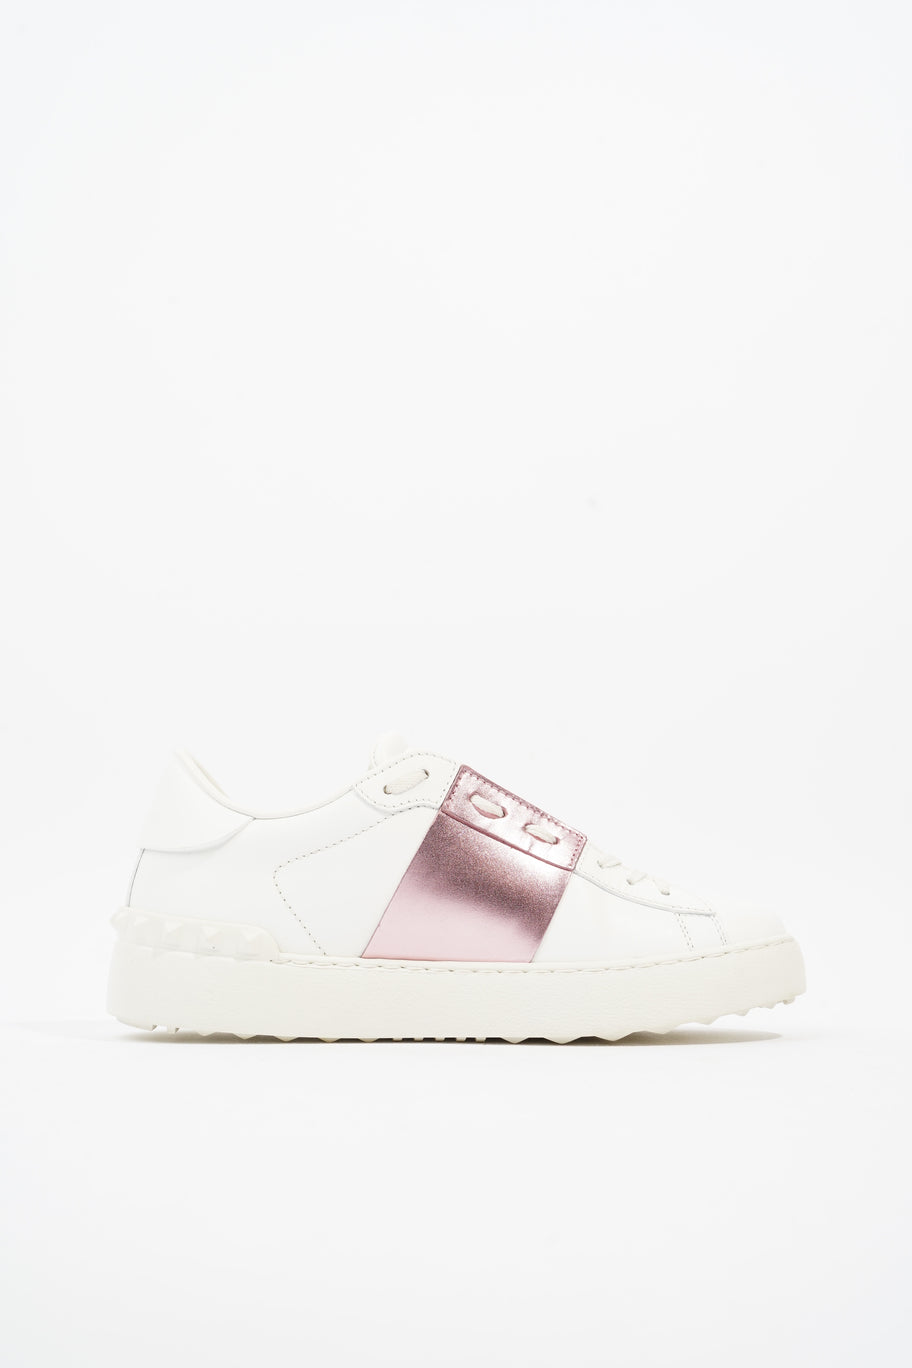 Open Sneakers White / Pink Leather EU 37.5 UK 4.5 Image 4